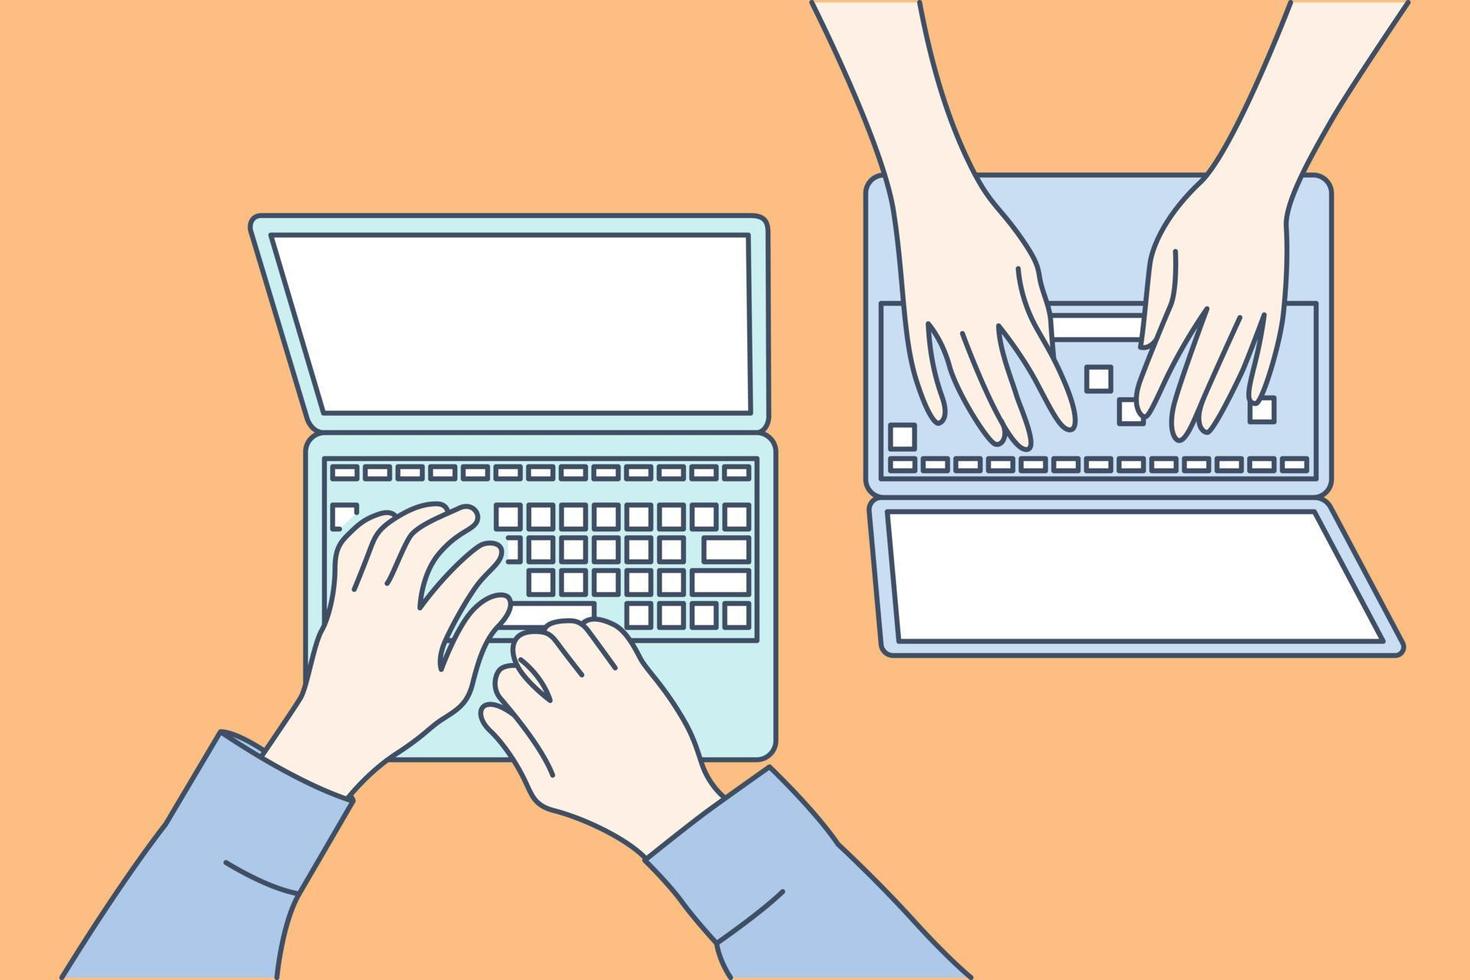 Two human hands busy with laptop, hand drawn style vector design illustration.